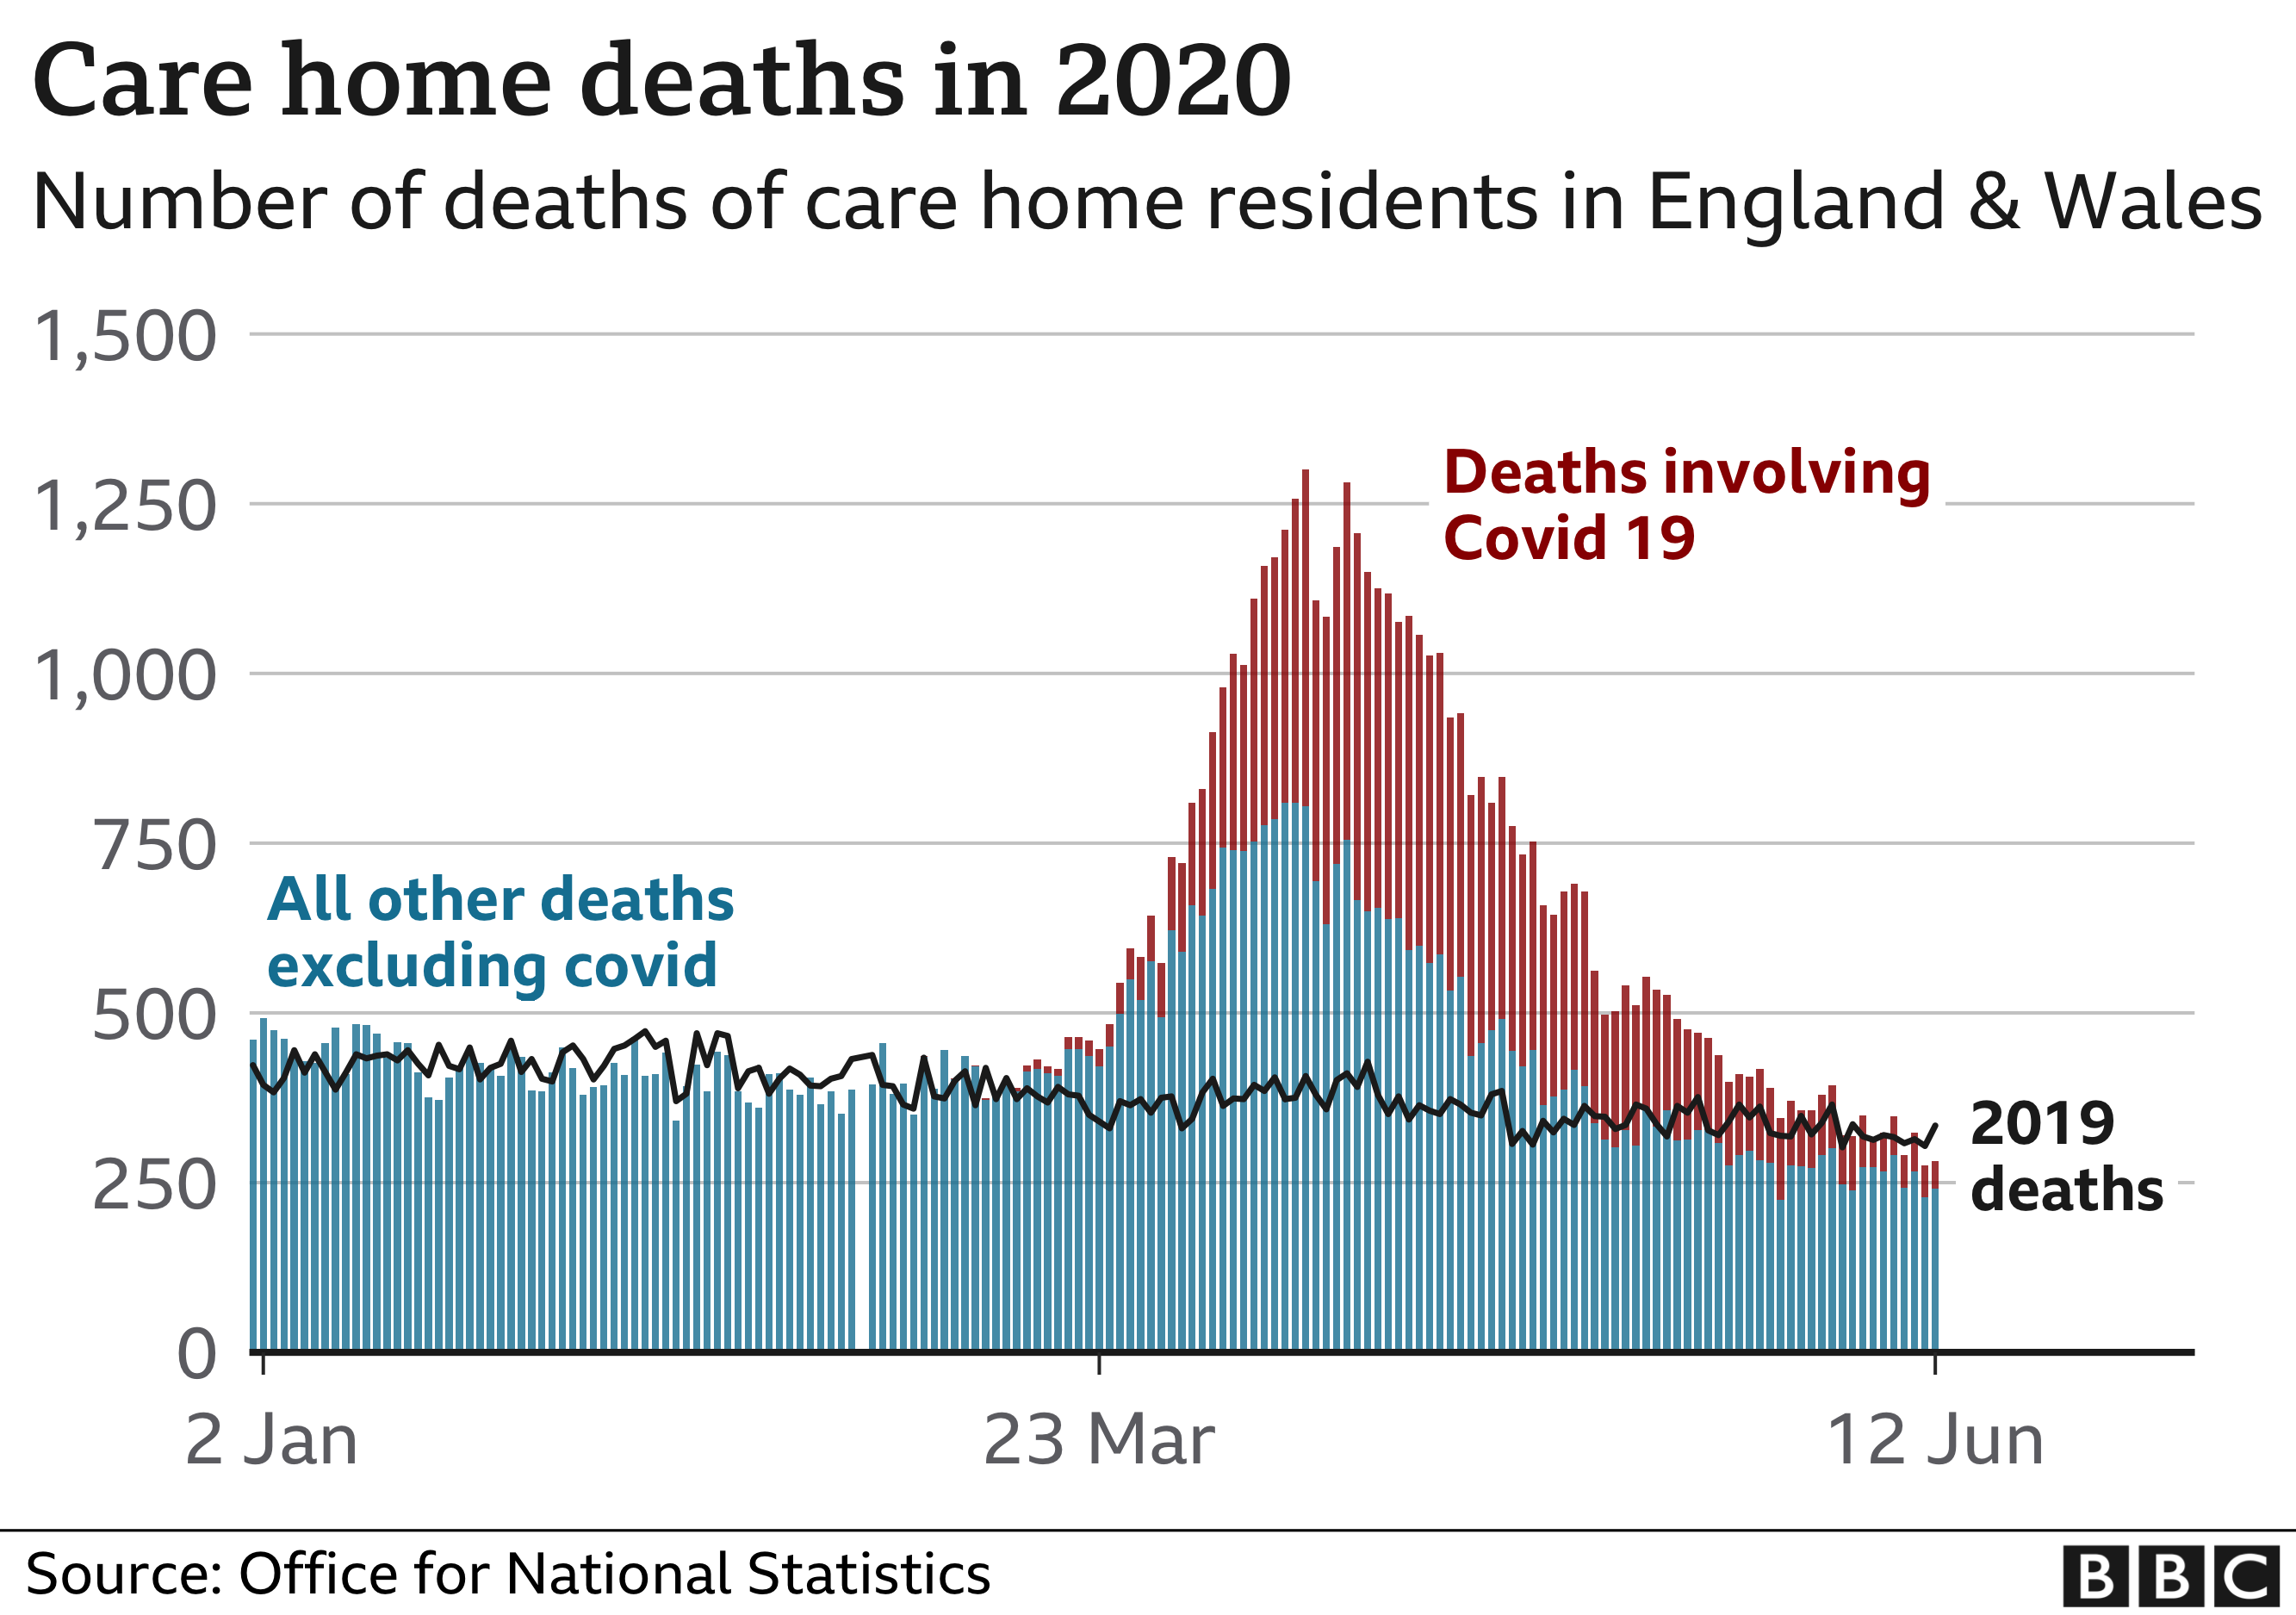 Excess deaths during the first wave of Covid